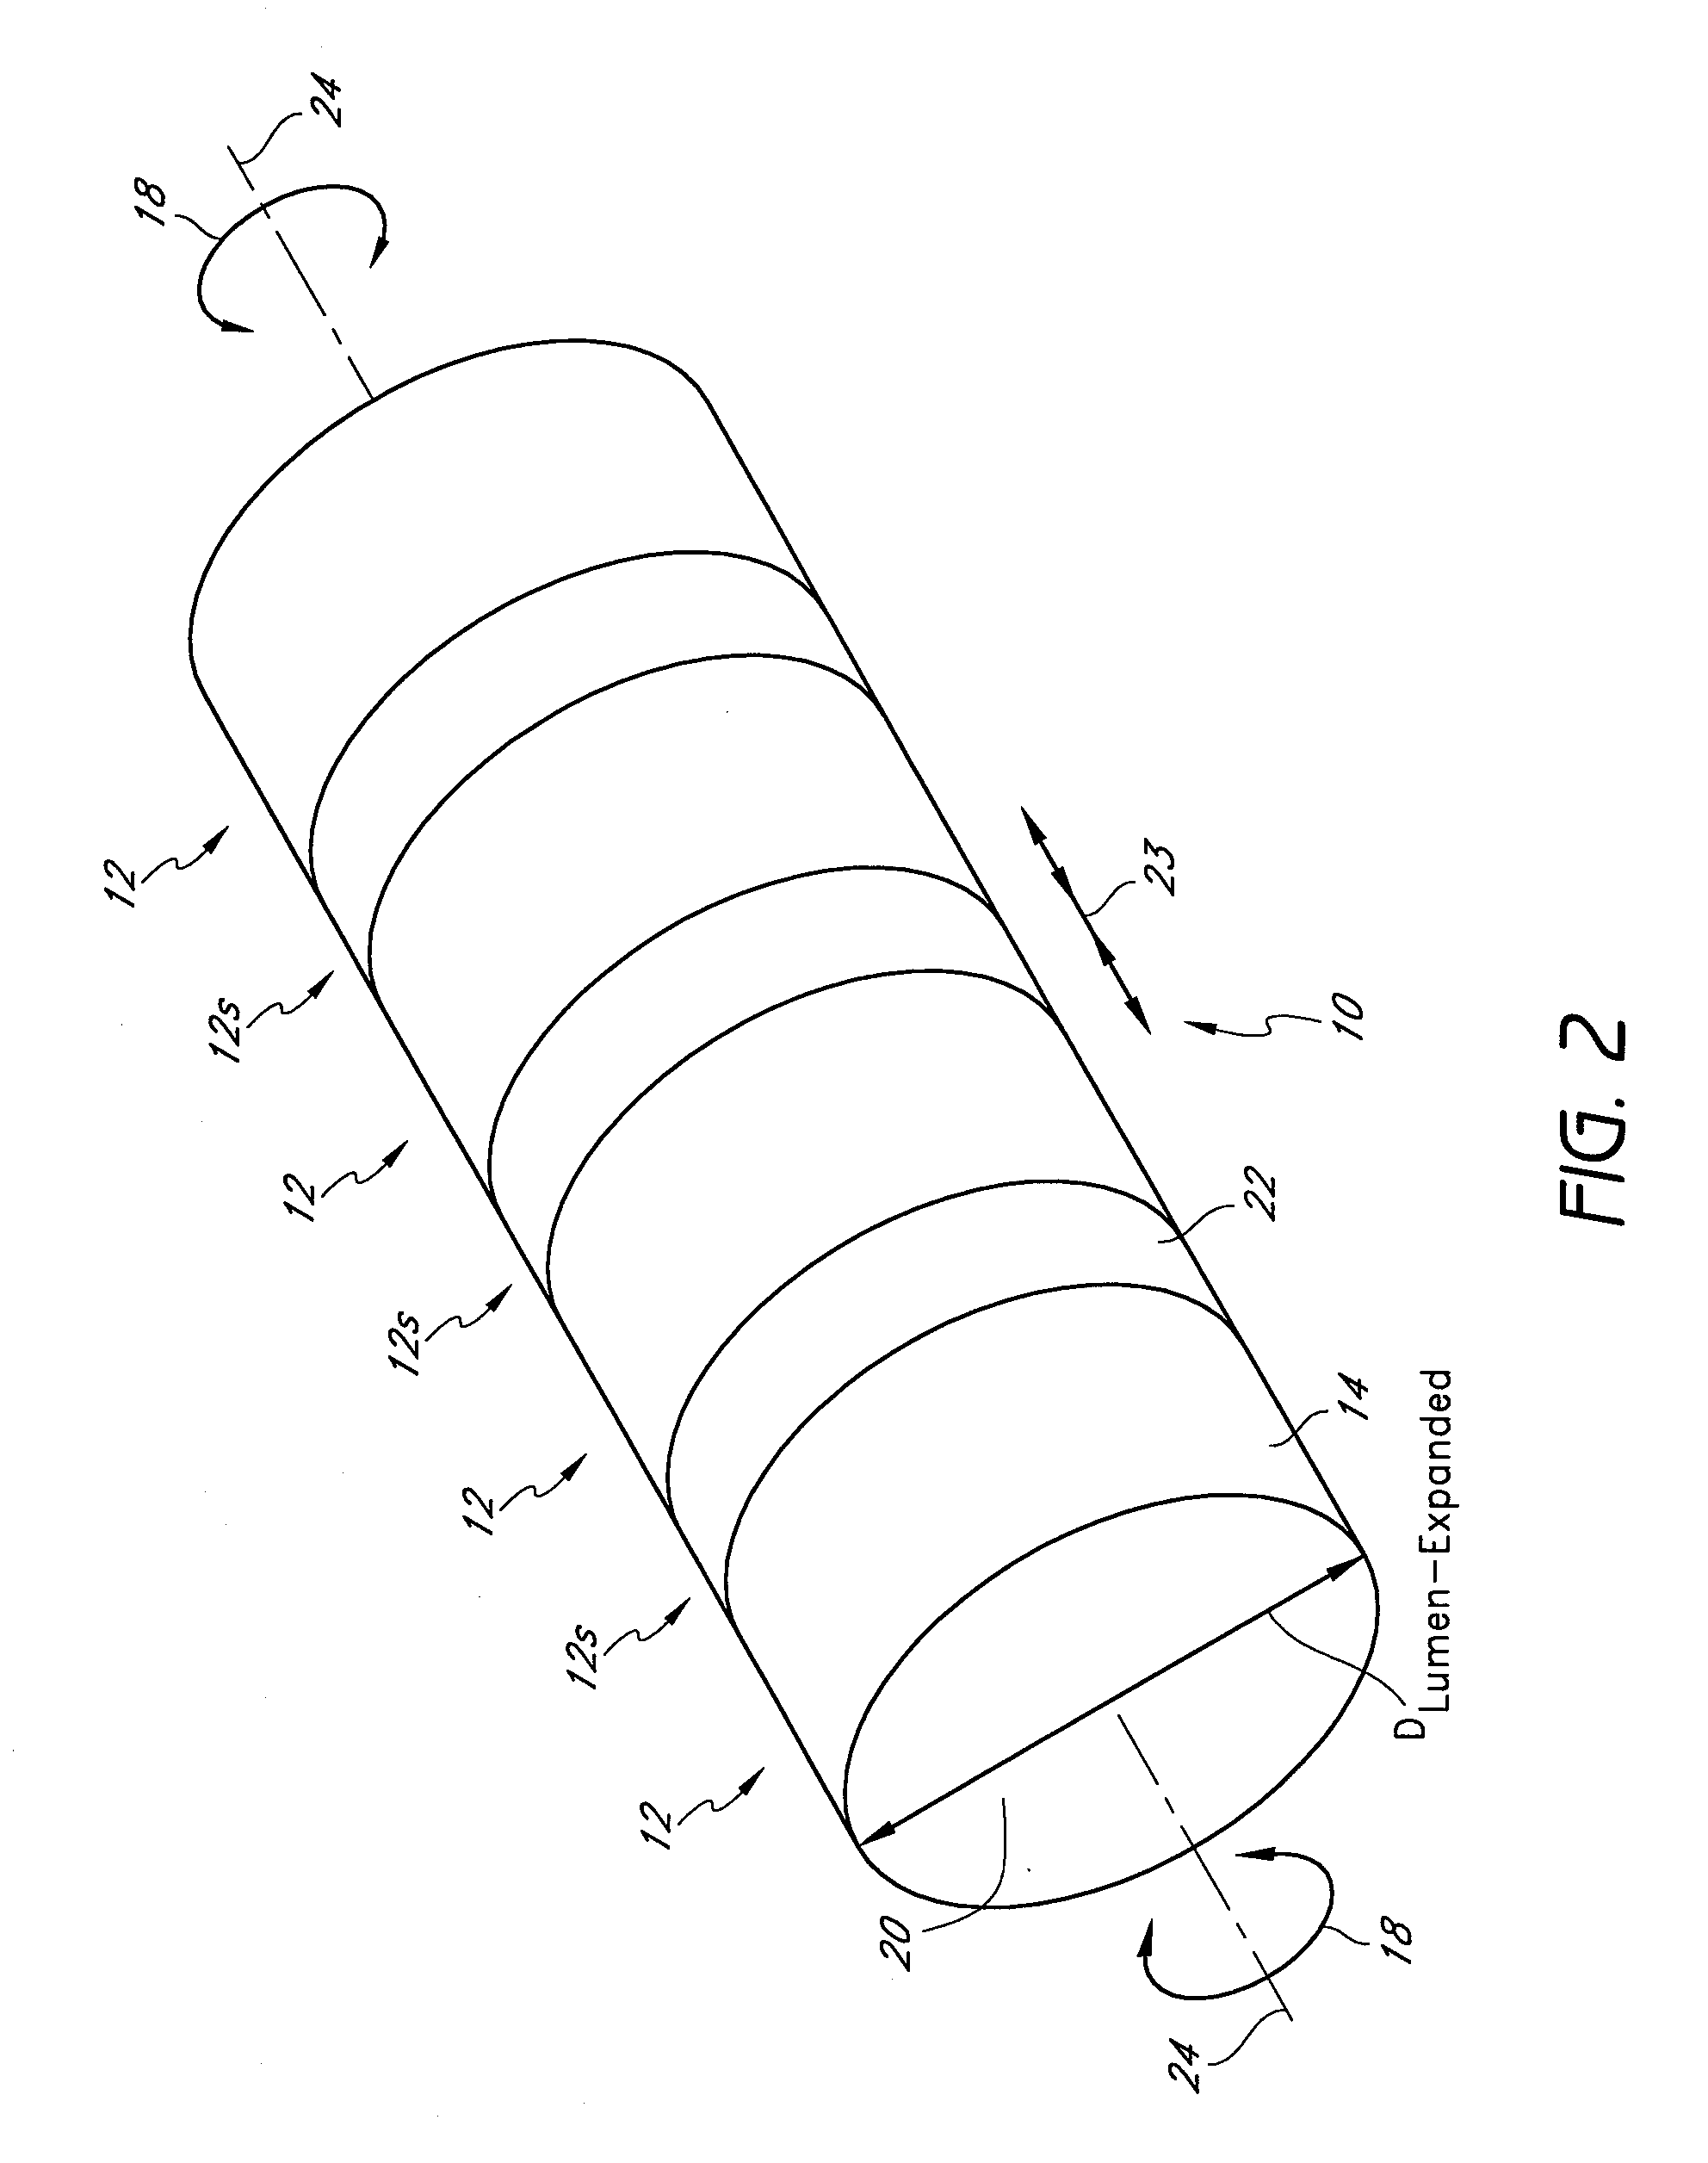 Circumferentially nested expandable device